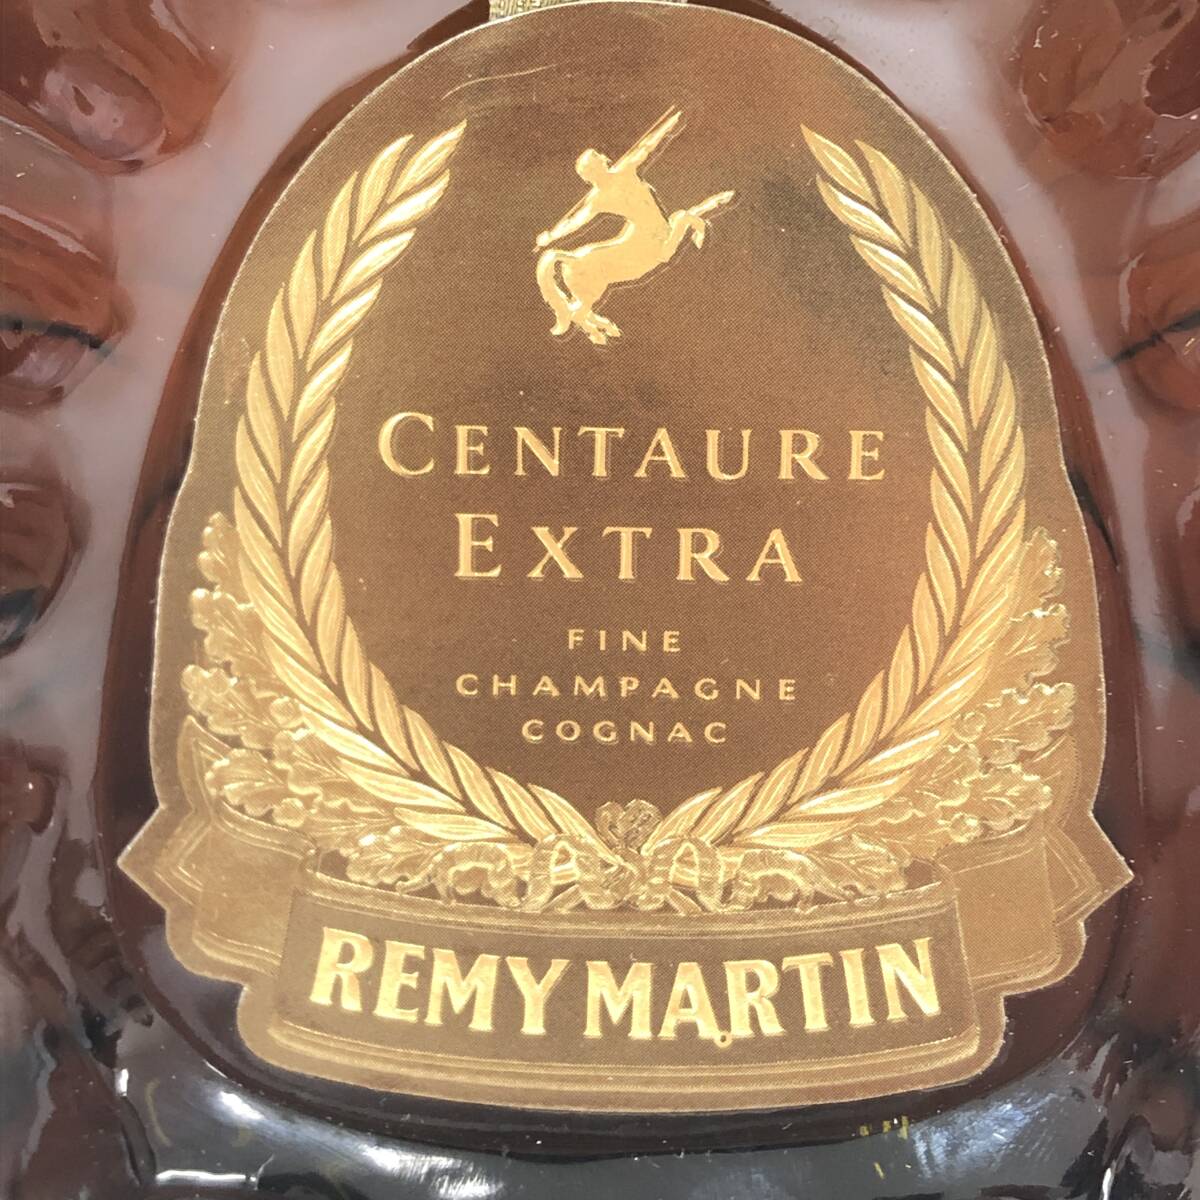 1 jpy ~ not yet . plug REMY MARTIN CENTAURE EXTRA Remy Martin cent - extra cognac 700ml 40% box attaching 